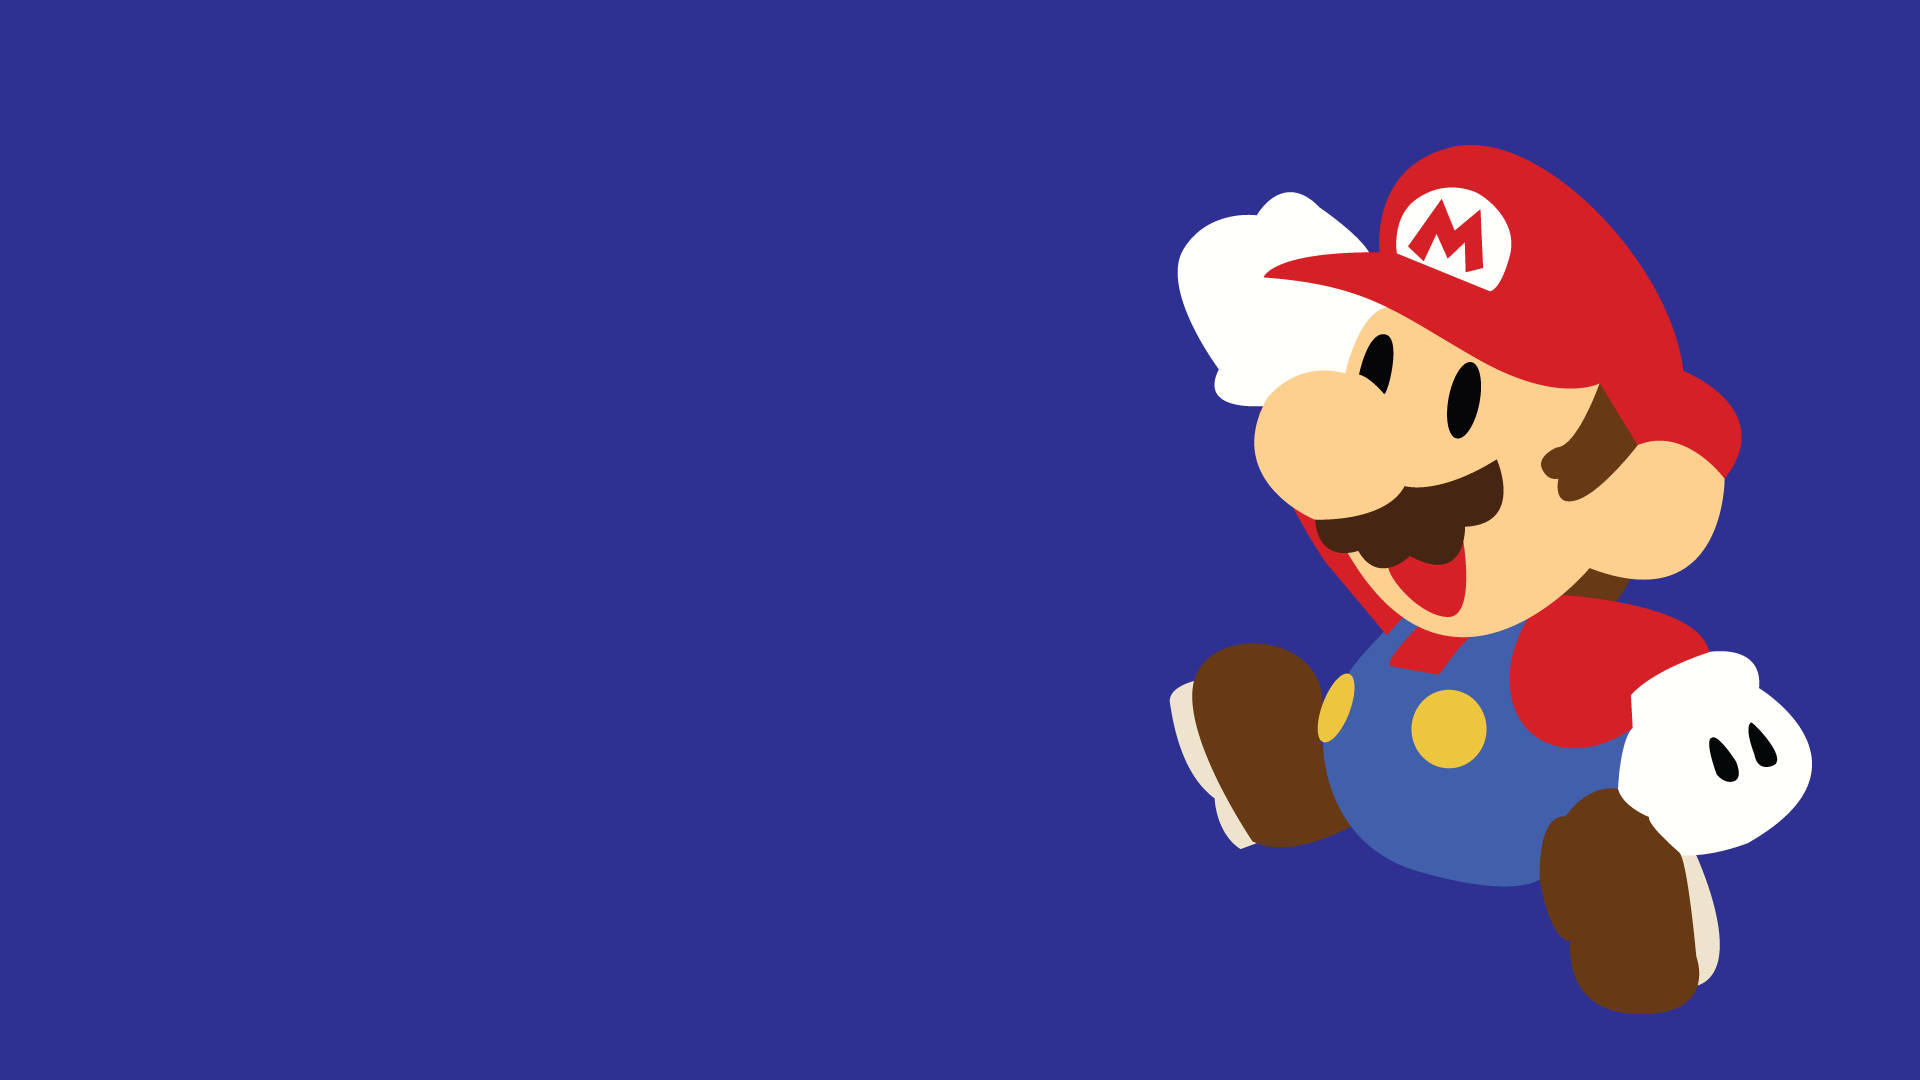 A Nintendo Mario Character Jumping In The Air Background